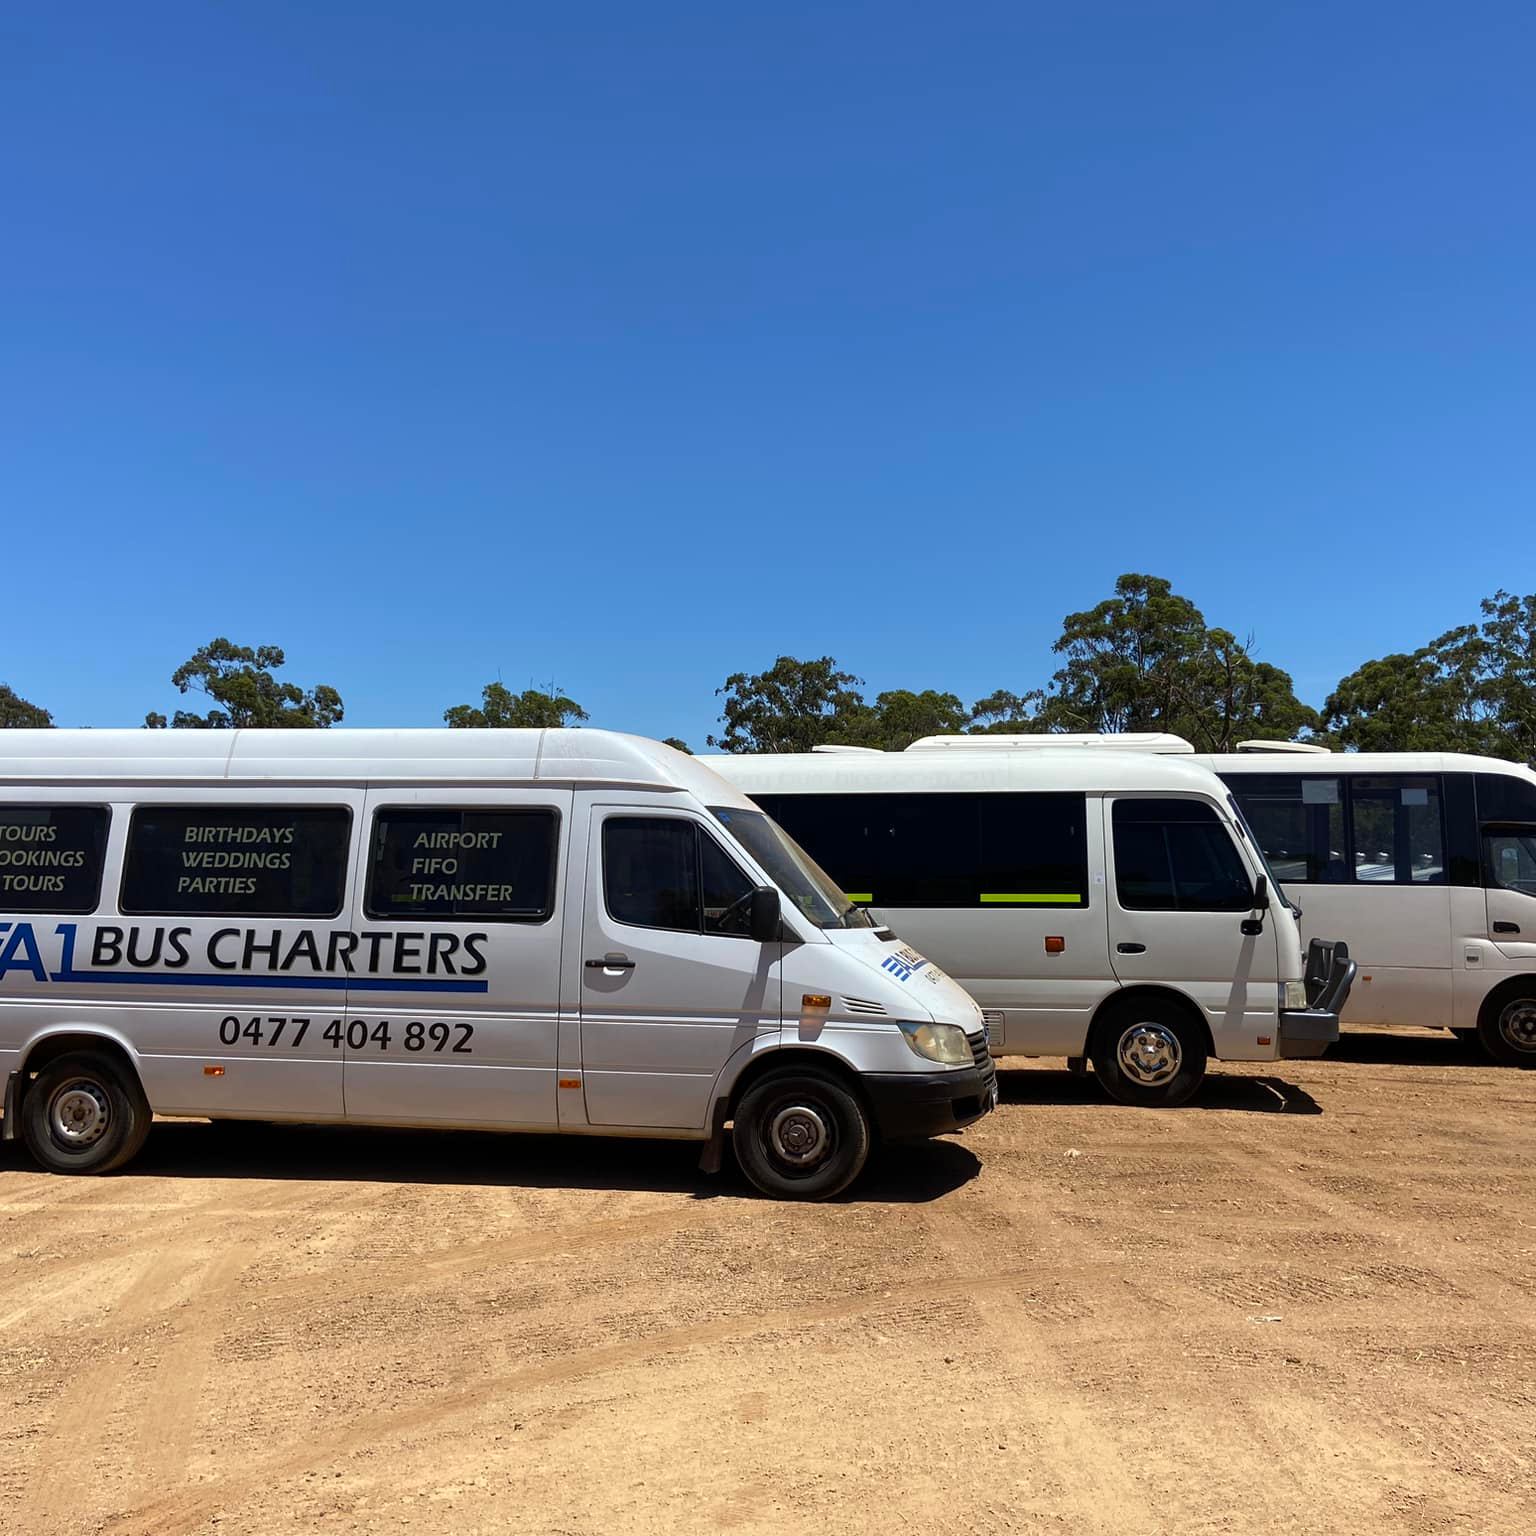 Image of the A1 Bus Charters Bus Fleet